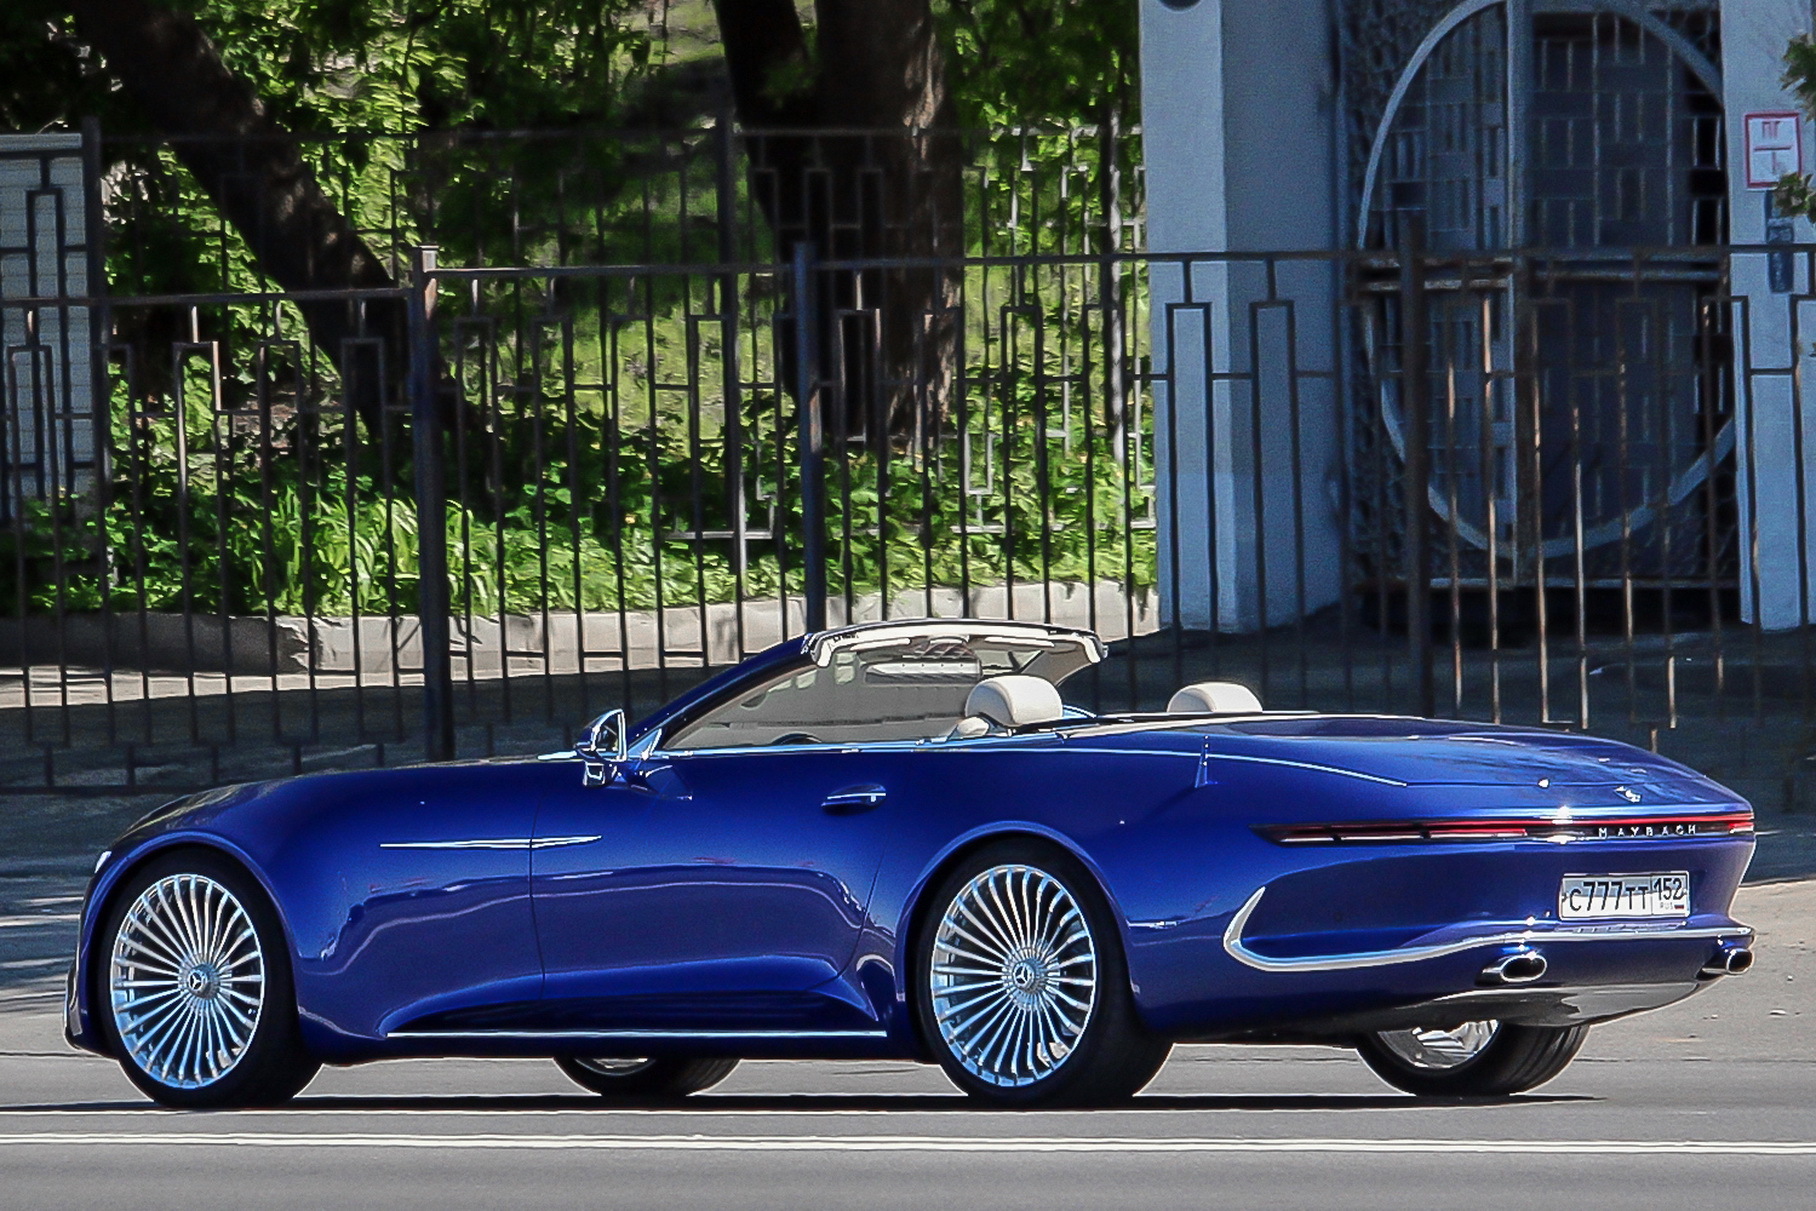 In the USA, they admired the handicraft copy of the Maybach from Nizhny Novgorod